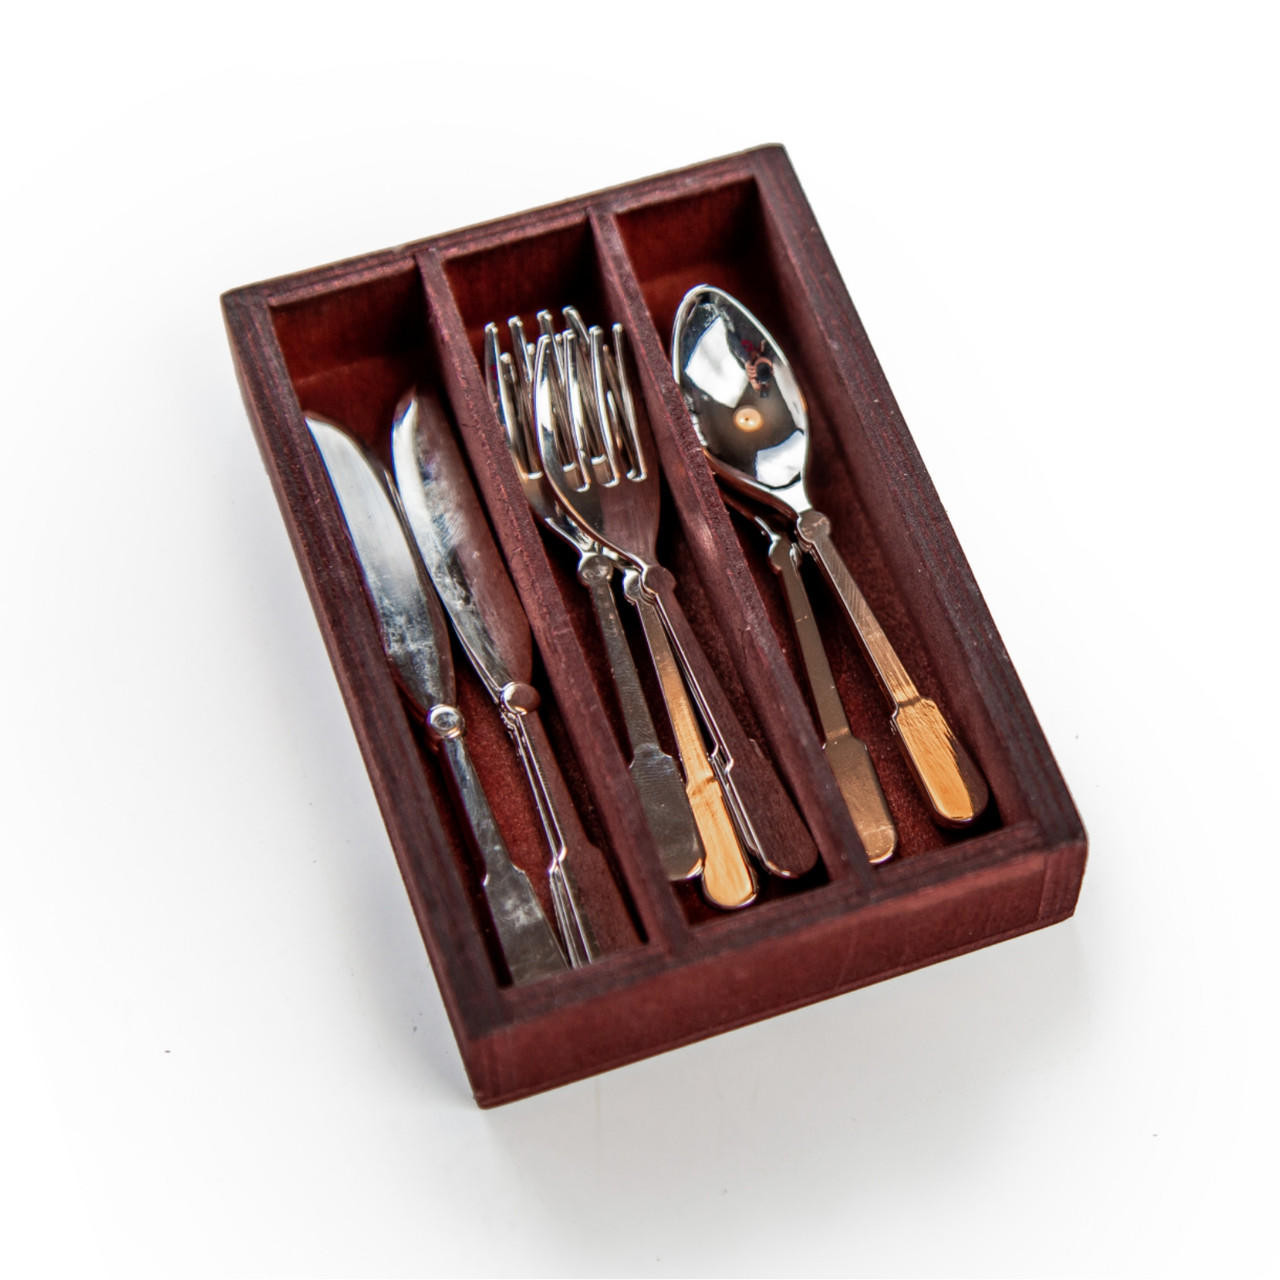 https://cdn11.bigcommerce.com/s-m5vcu70215/images/stencil/1280x1280/products/154/2152/the-queens-treasures-13-piece-silverware-set-with-wooden-holder-accessories-for-18-inch-dolls__15010.1692298877.jpg?c=1